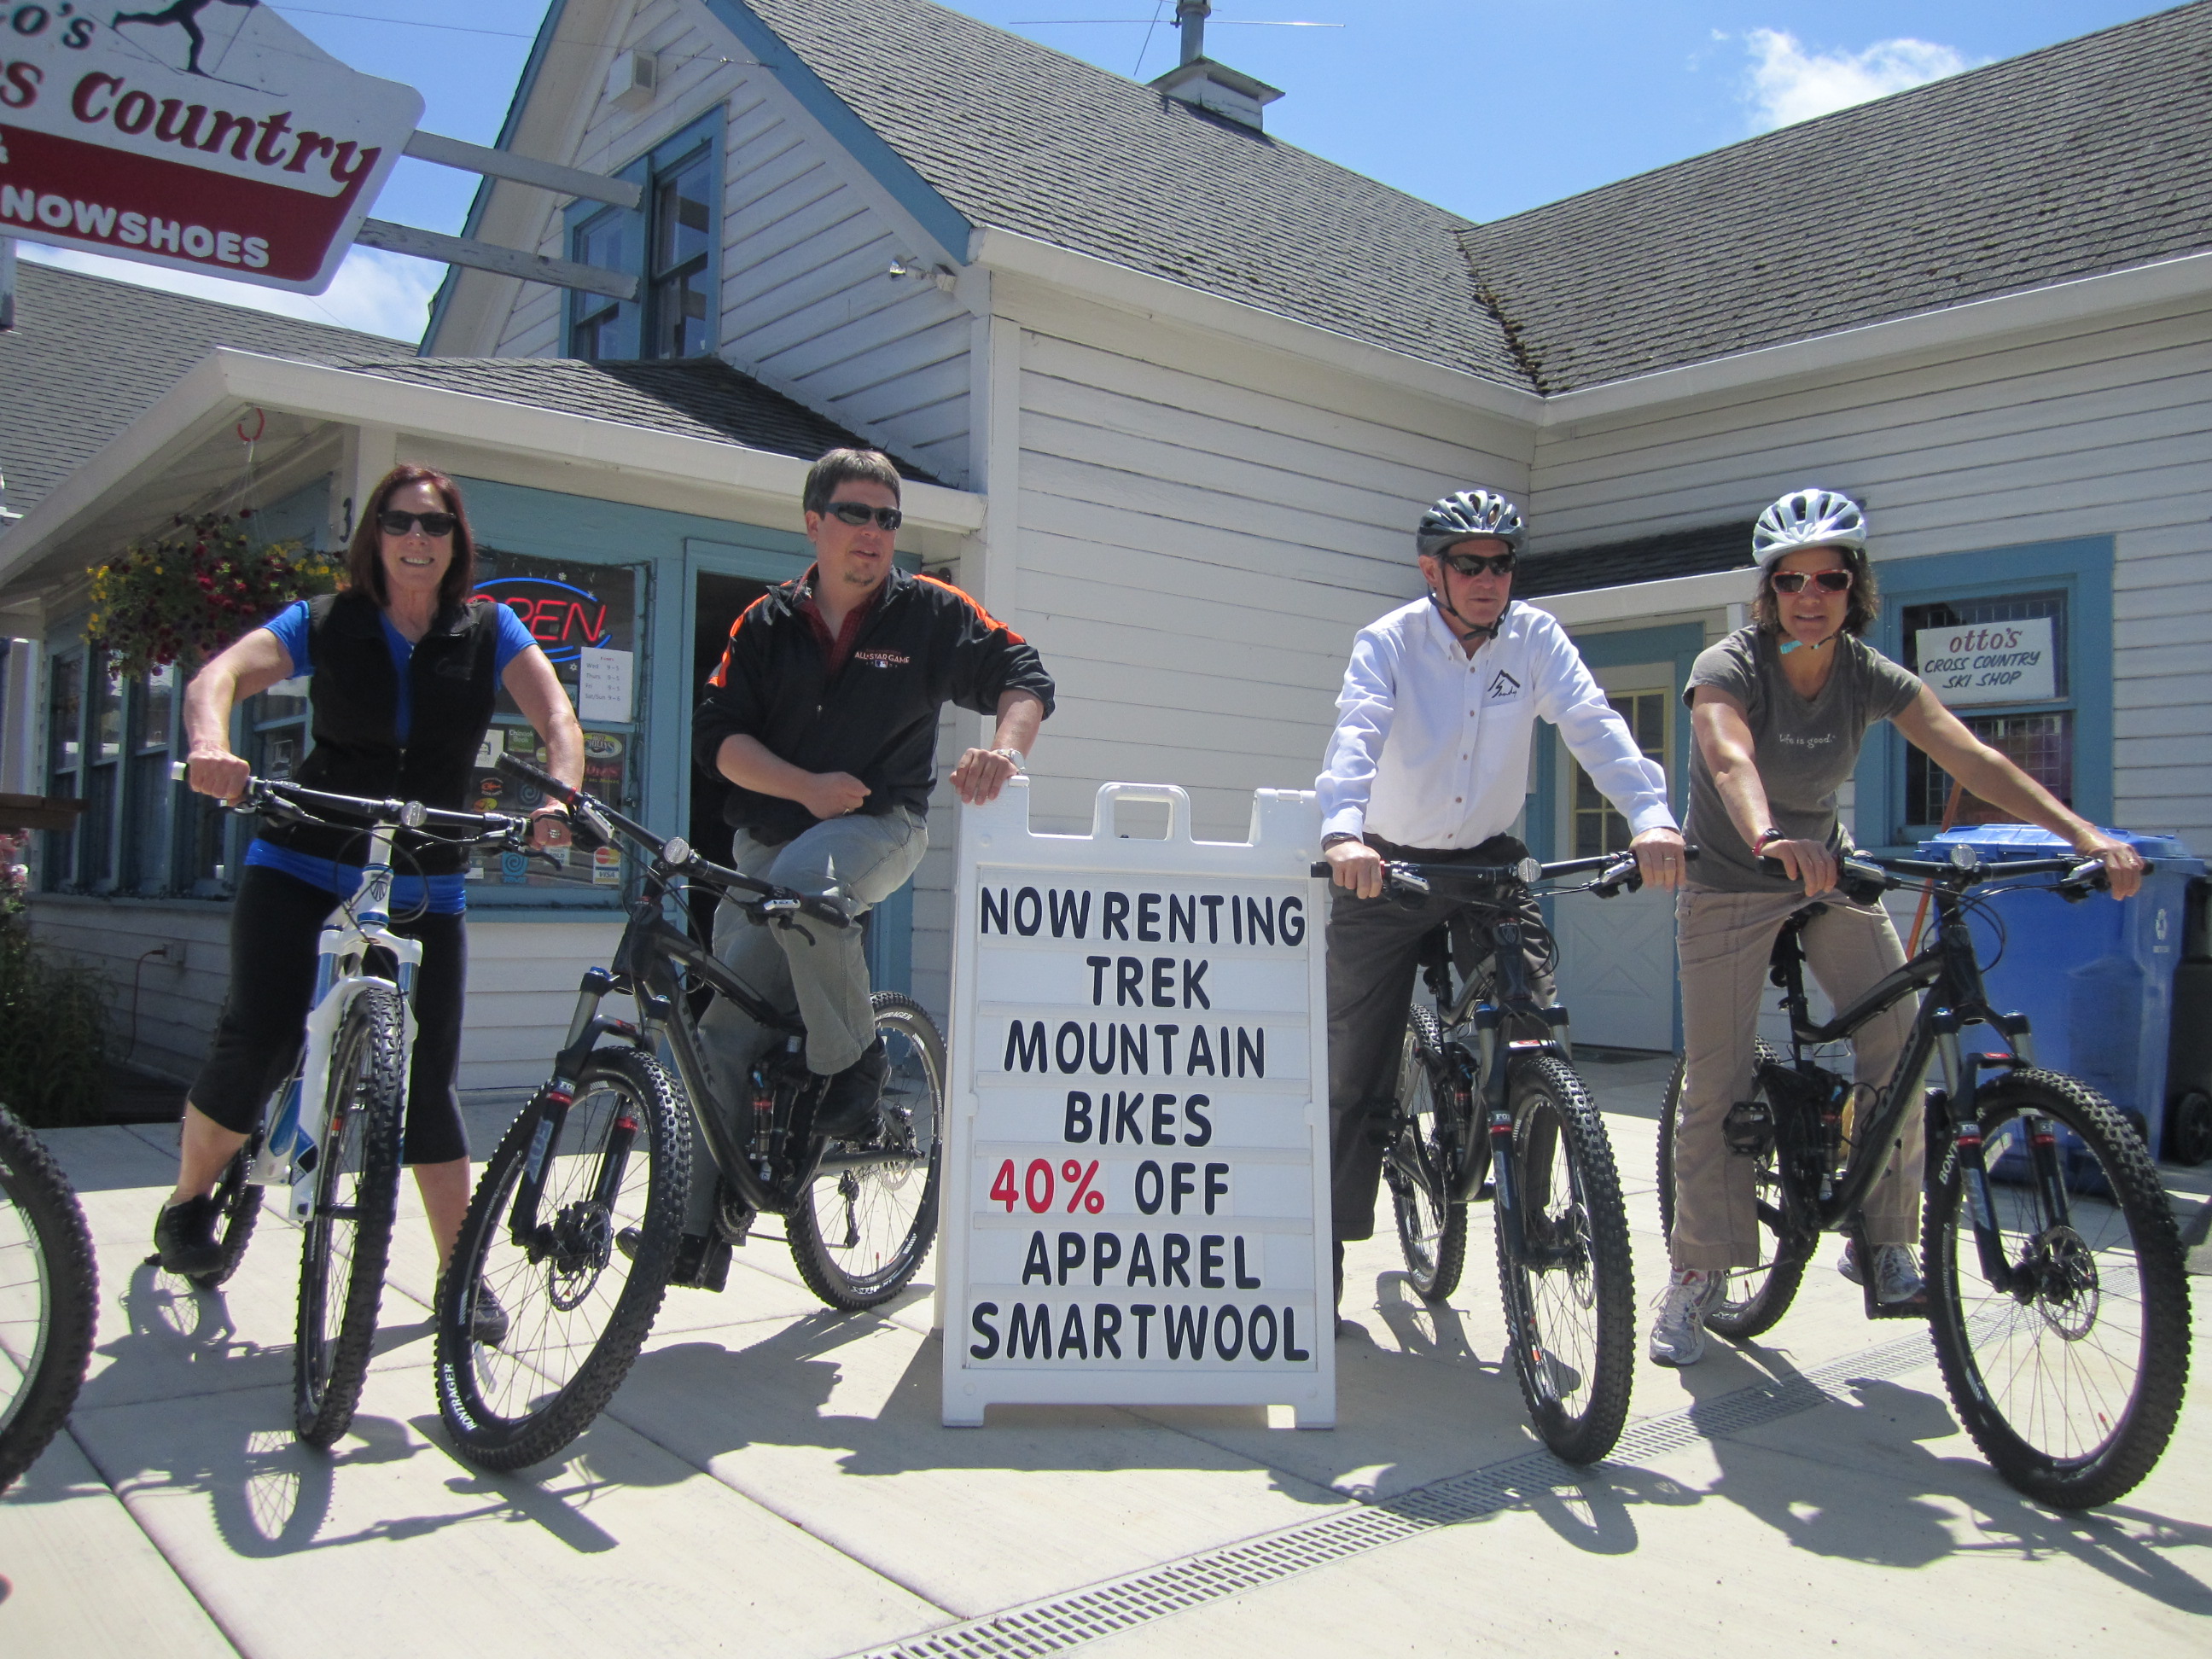 Left to Right. Andreanne Rode, owner of Otto's, Dave synder, Scott Lazenby and Carol Cohen from the City of Sandy who supported us in our Quest to bring mountain bikes to Sandy.